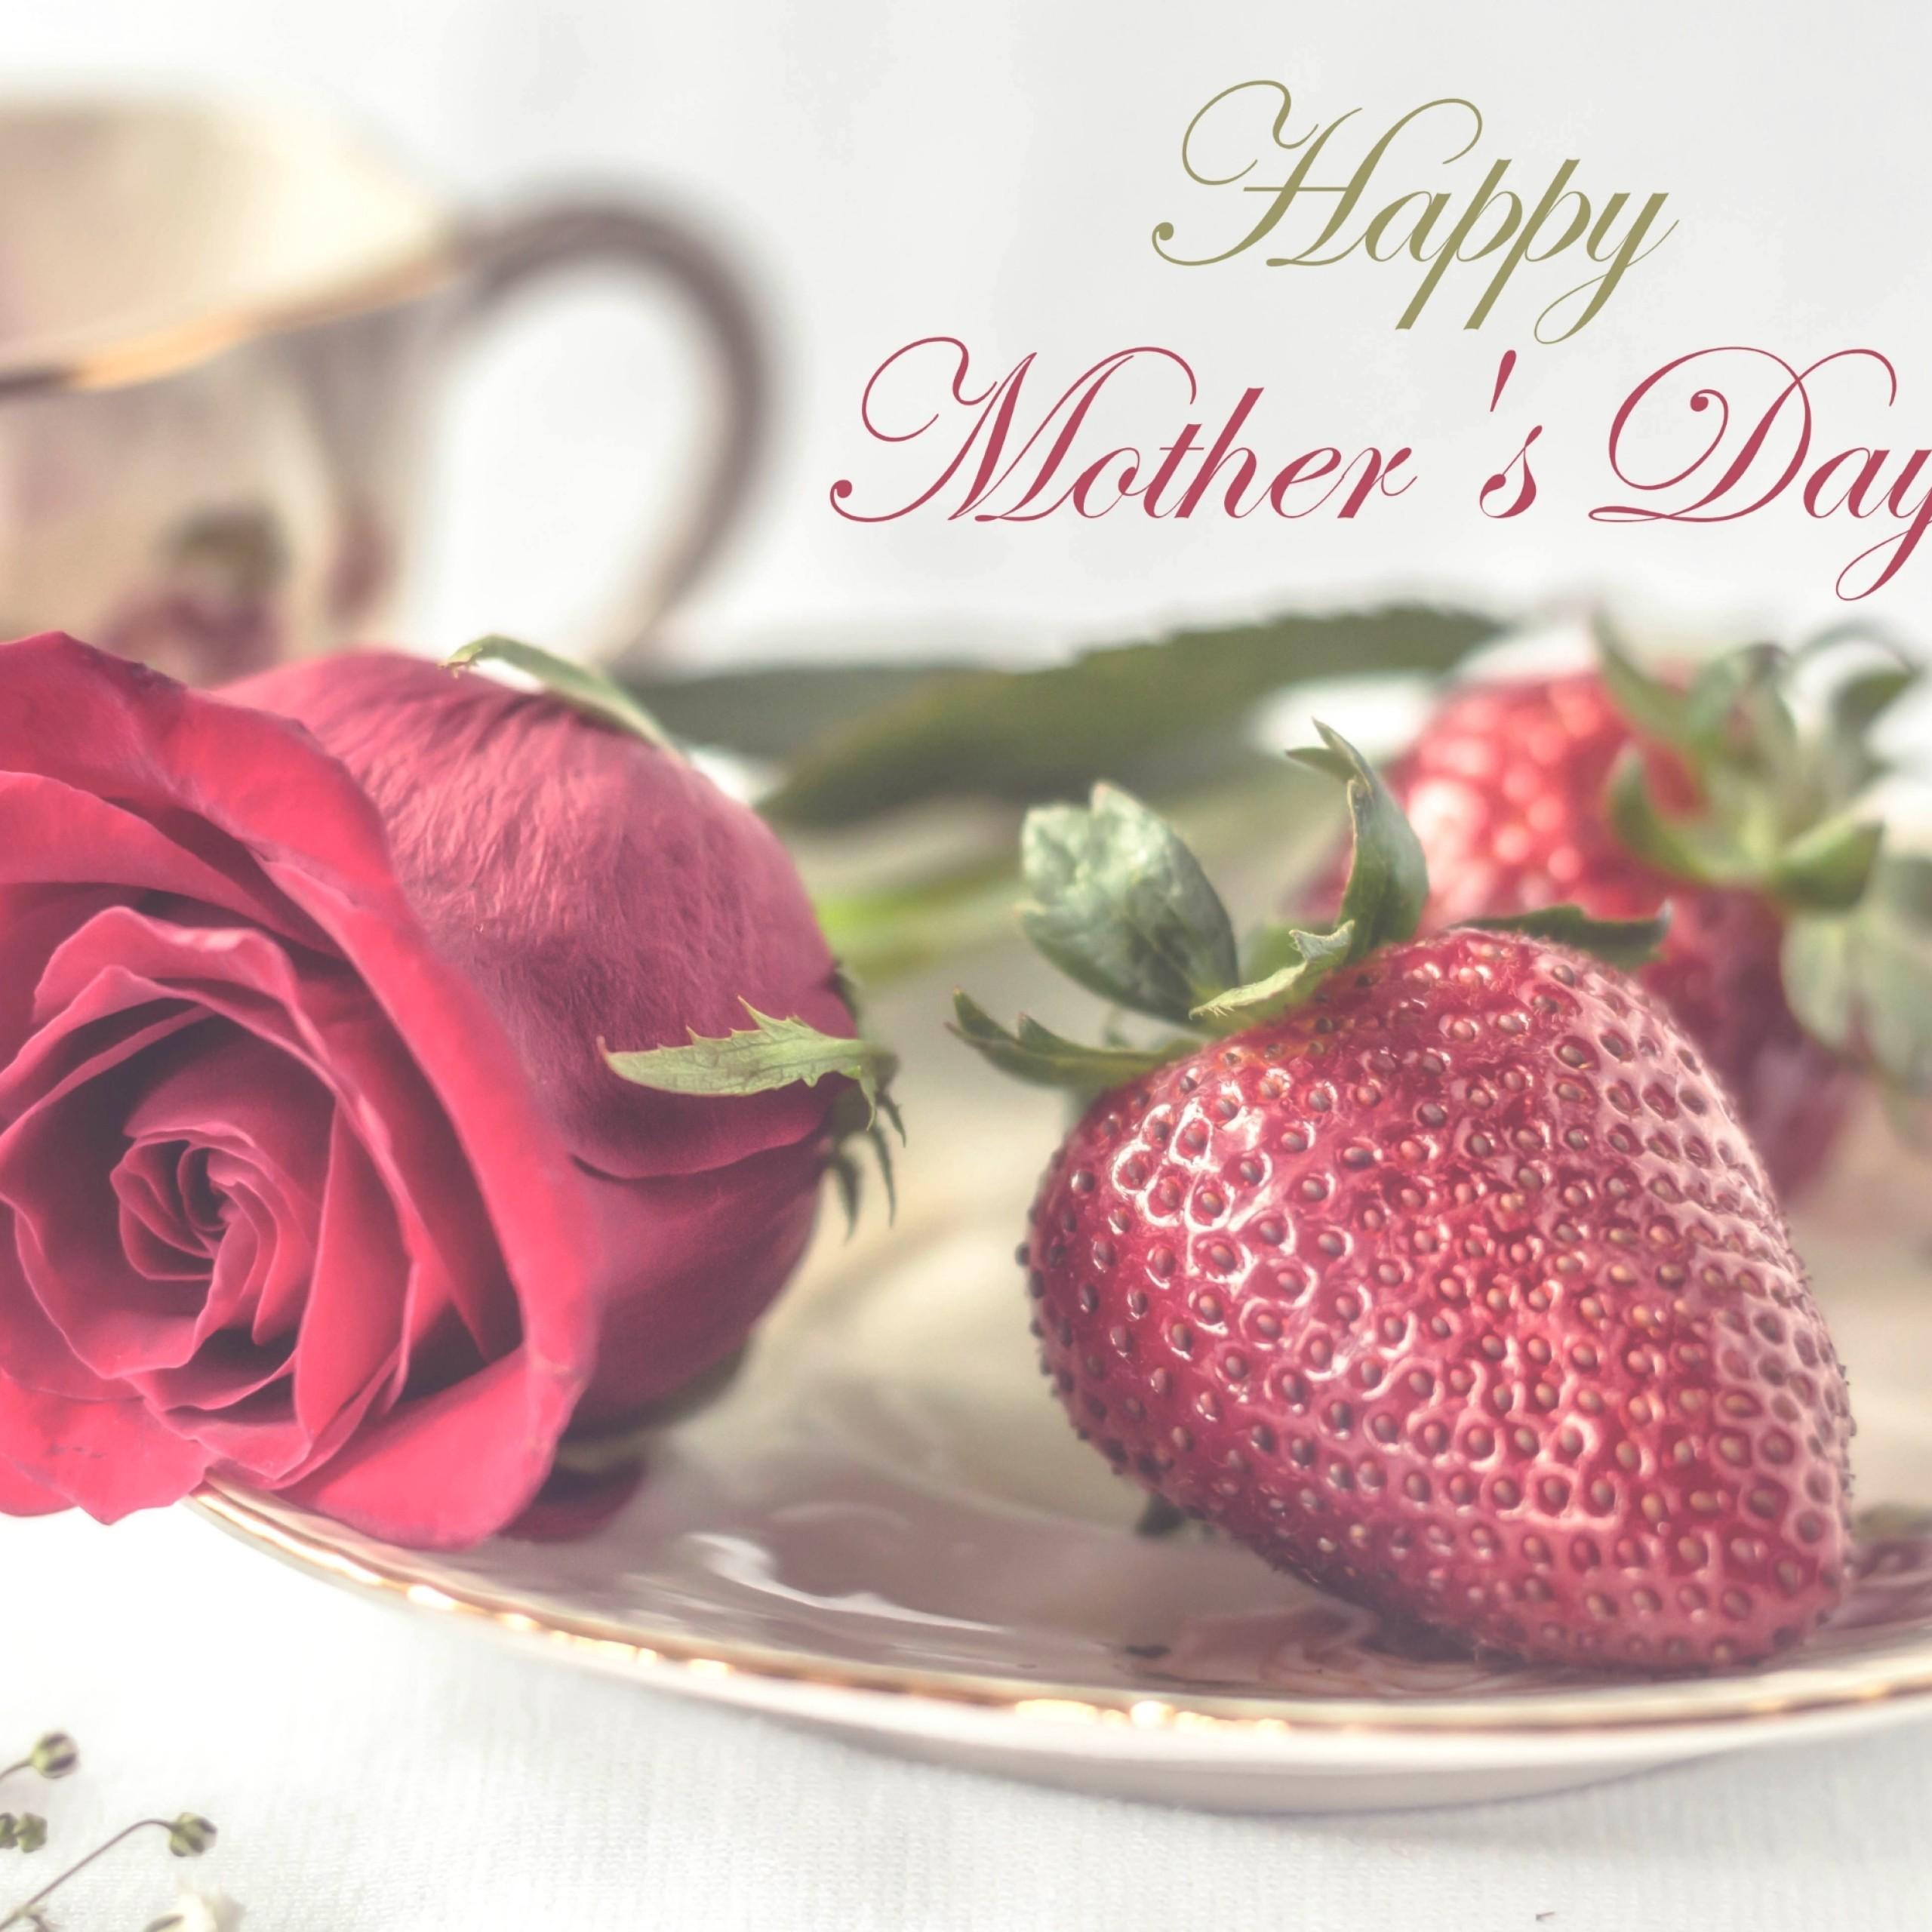 Wallpaper Happy Mother's Day, Rose flower, Strawberry, Celebrations